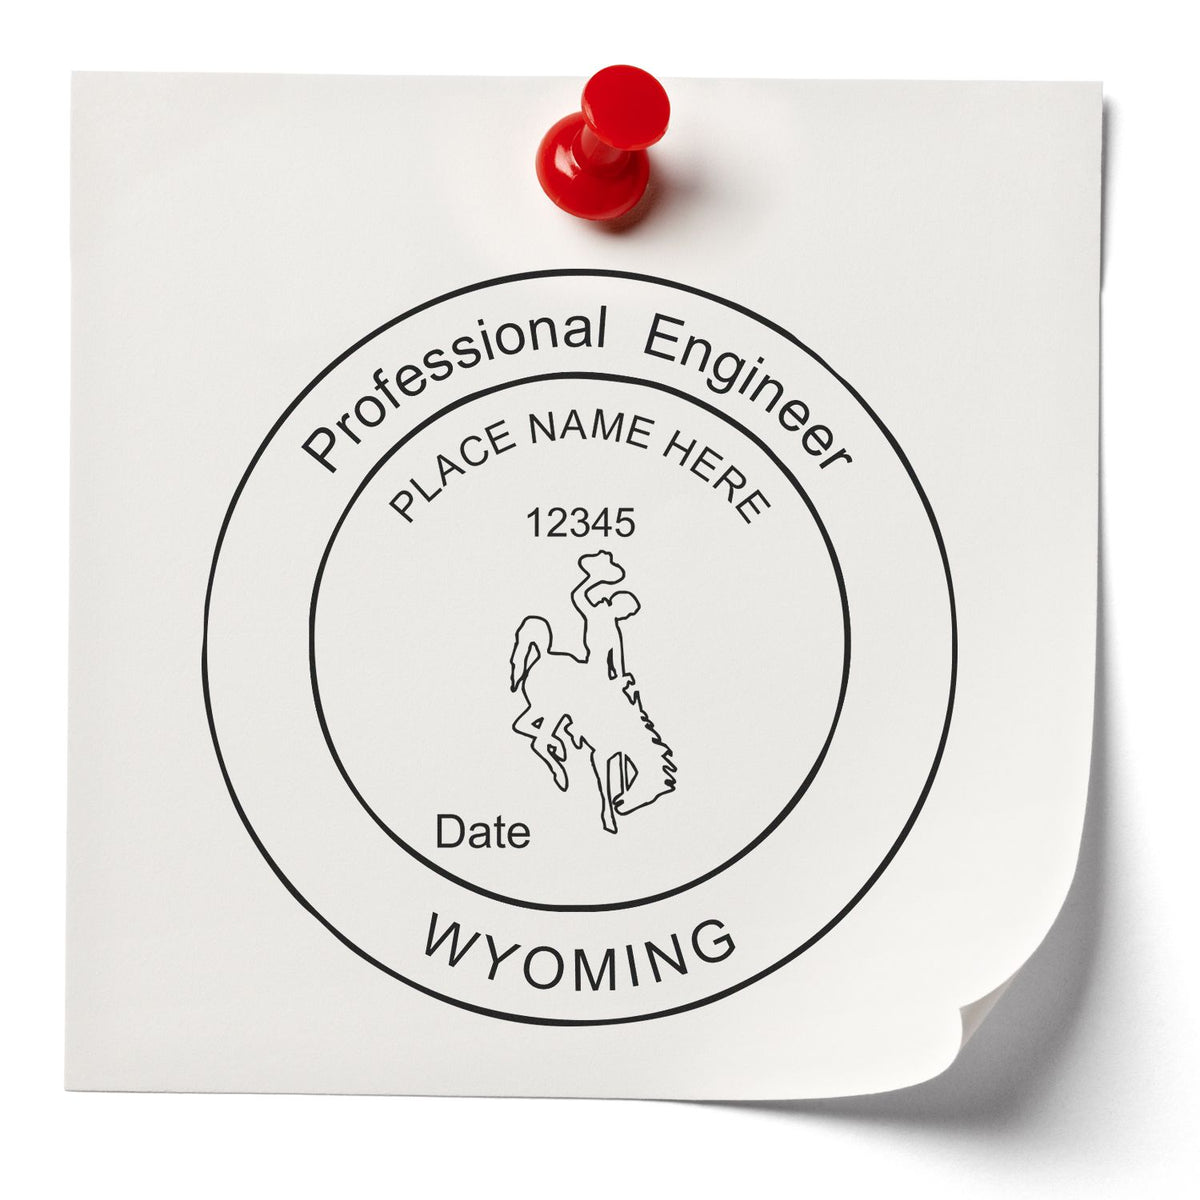 A lifestyle photo showing a stamped image of the Slim Pre-Inked Wyoming Professional Engineer Seal Stamp on a piece of paper